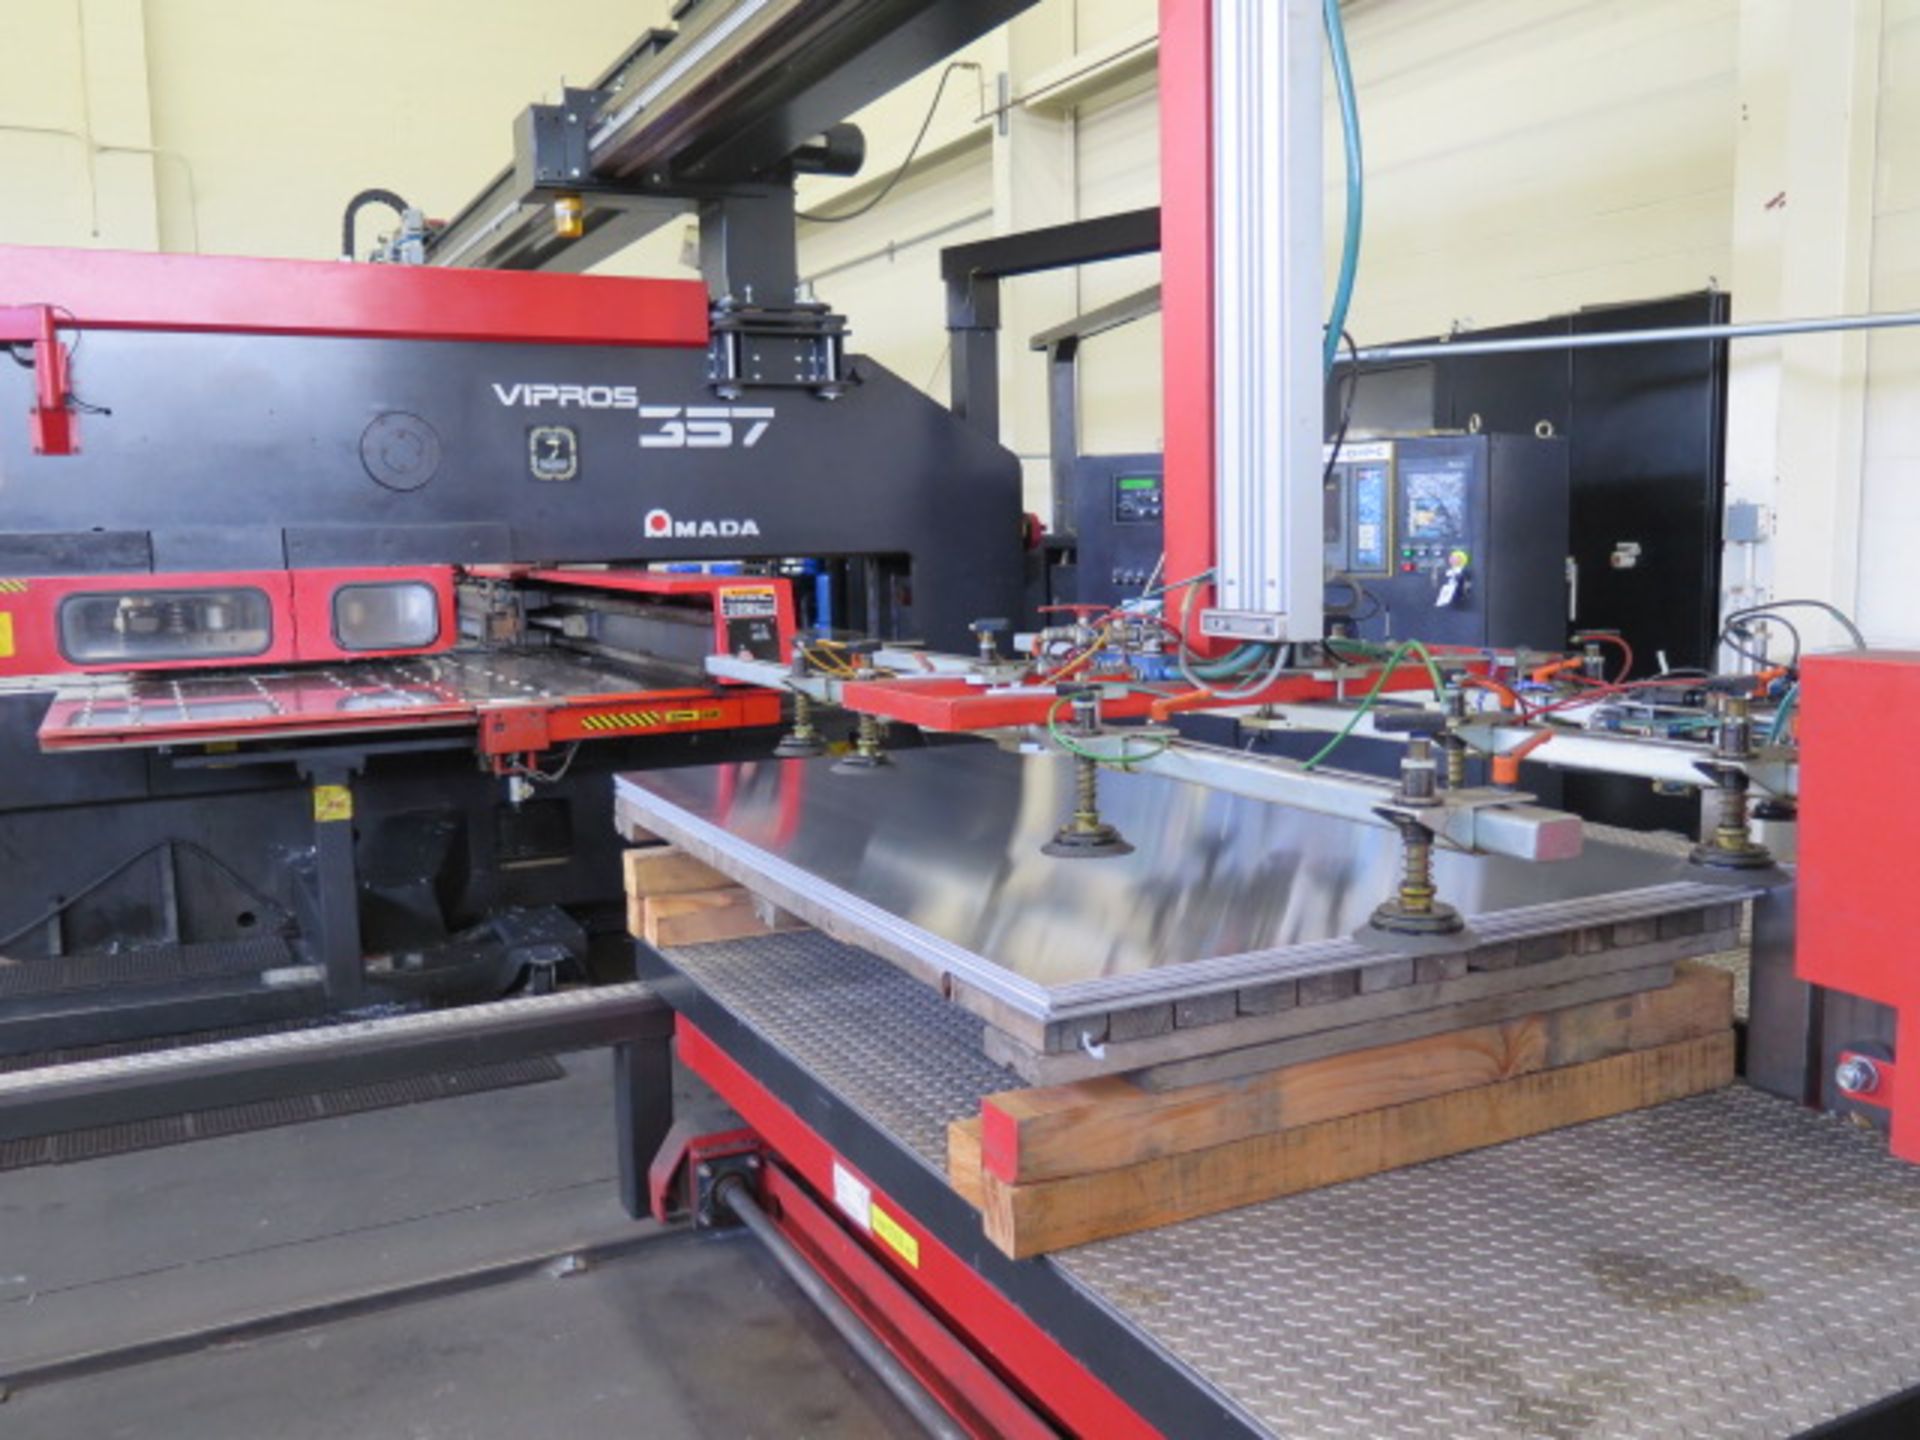 Amada VIPROS 357 30-Ton CNC Turret Punch Cell s/n 35710664 w/ 04P-C Controls, 58-Station, SOLD AS IS - Image 28 of 37